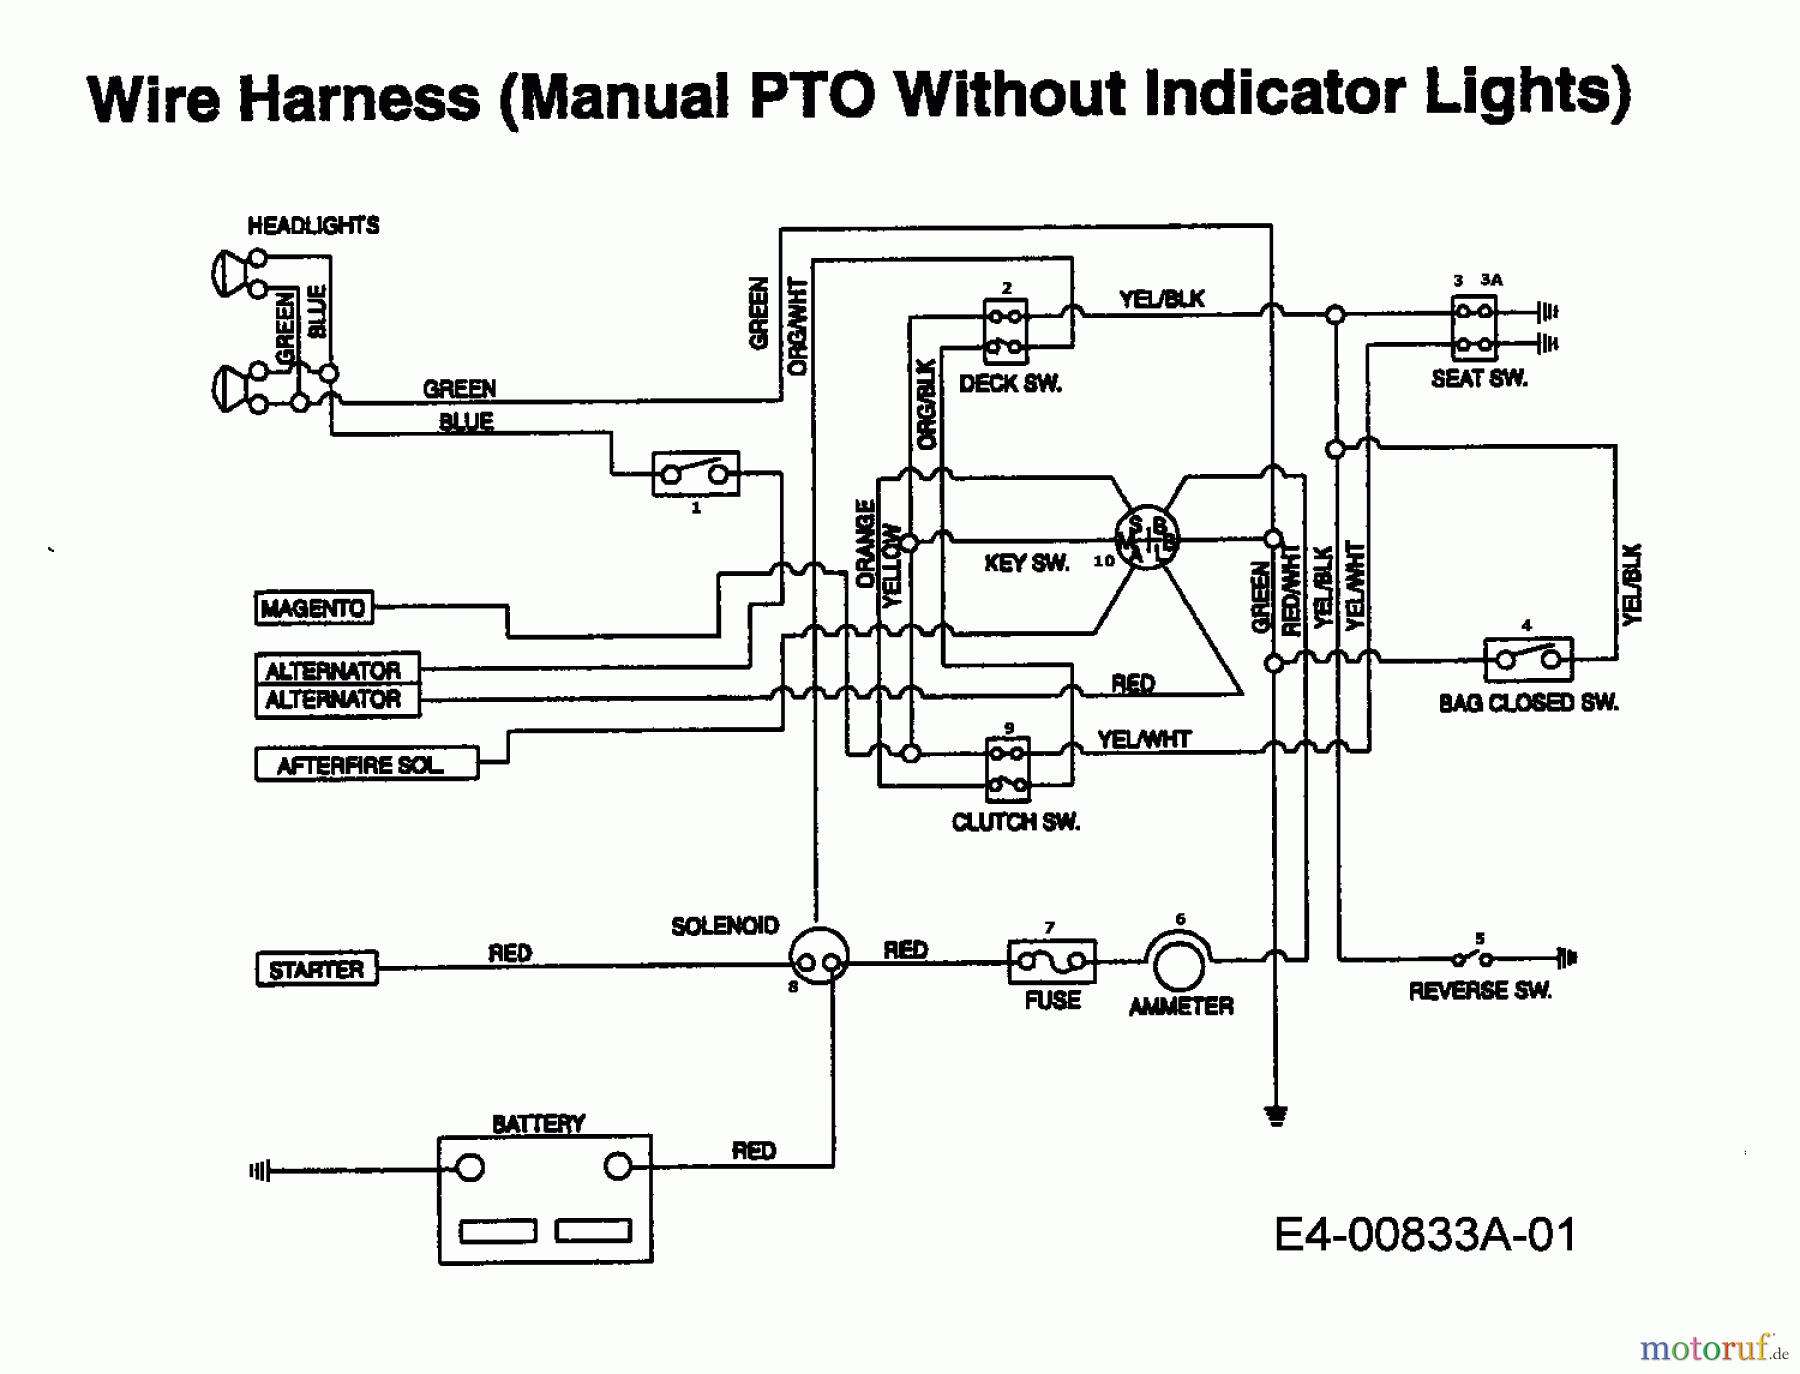  Gutbrod Lawn tractors Golden Sprint 2500 H 13AD79GN604  (1998) Wiring diagram without indicator lights